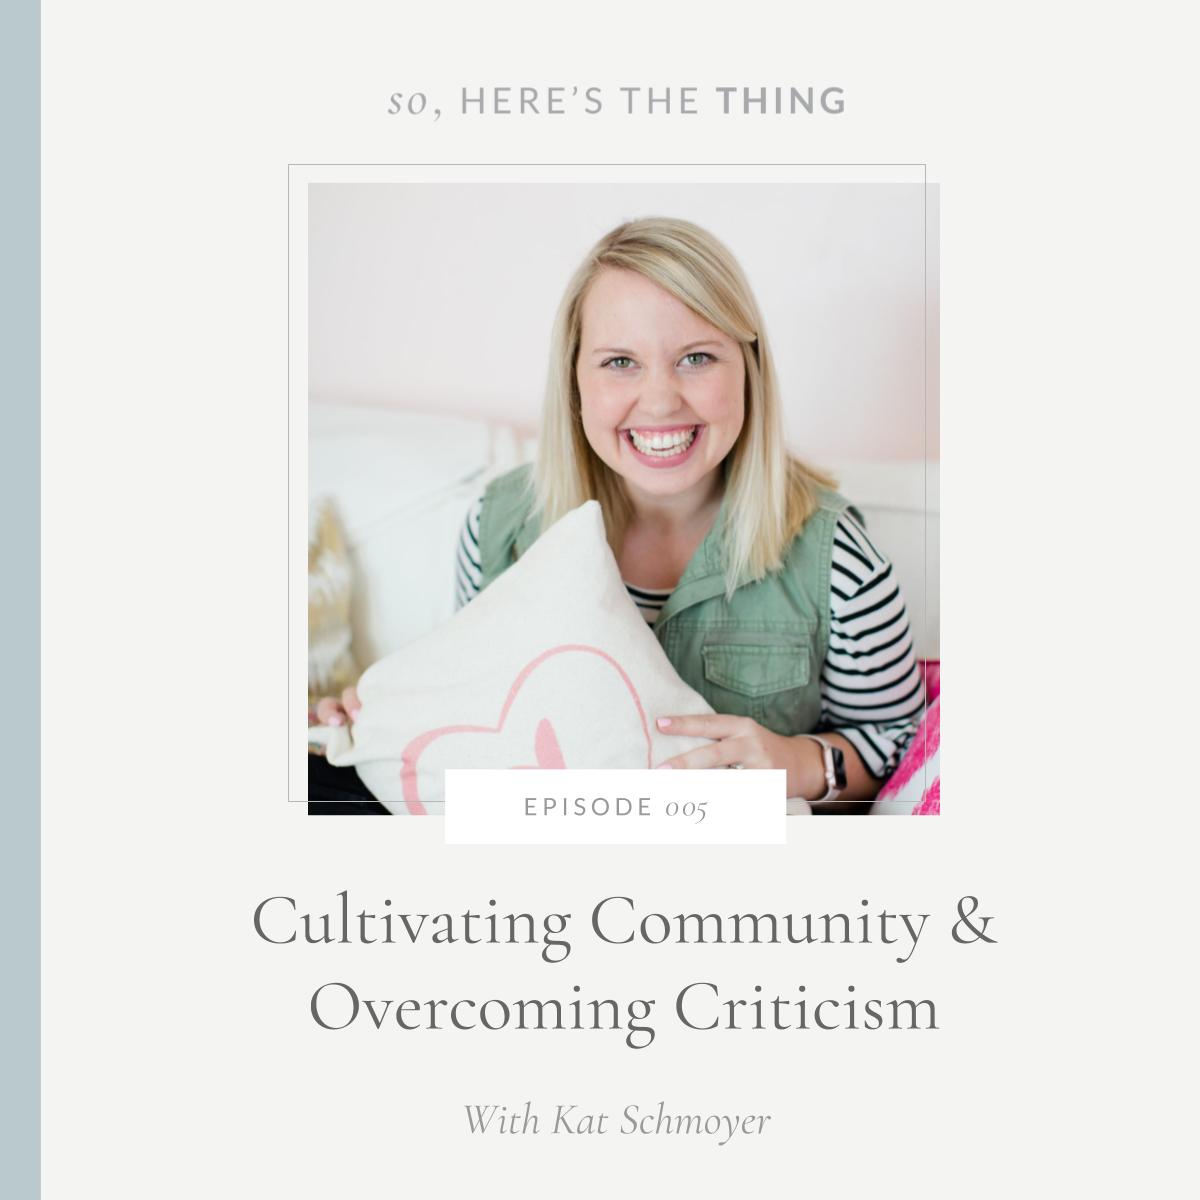 Cultivating Community & Overcoming Criticism with Kat Schmoyer